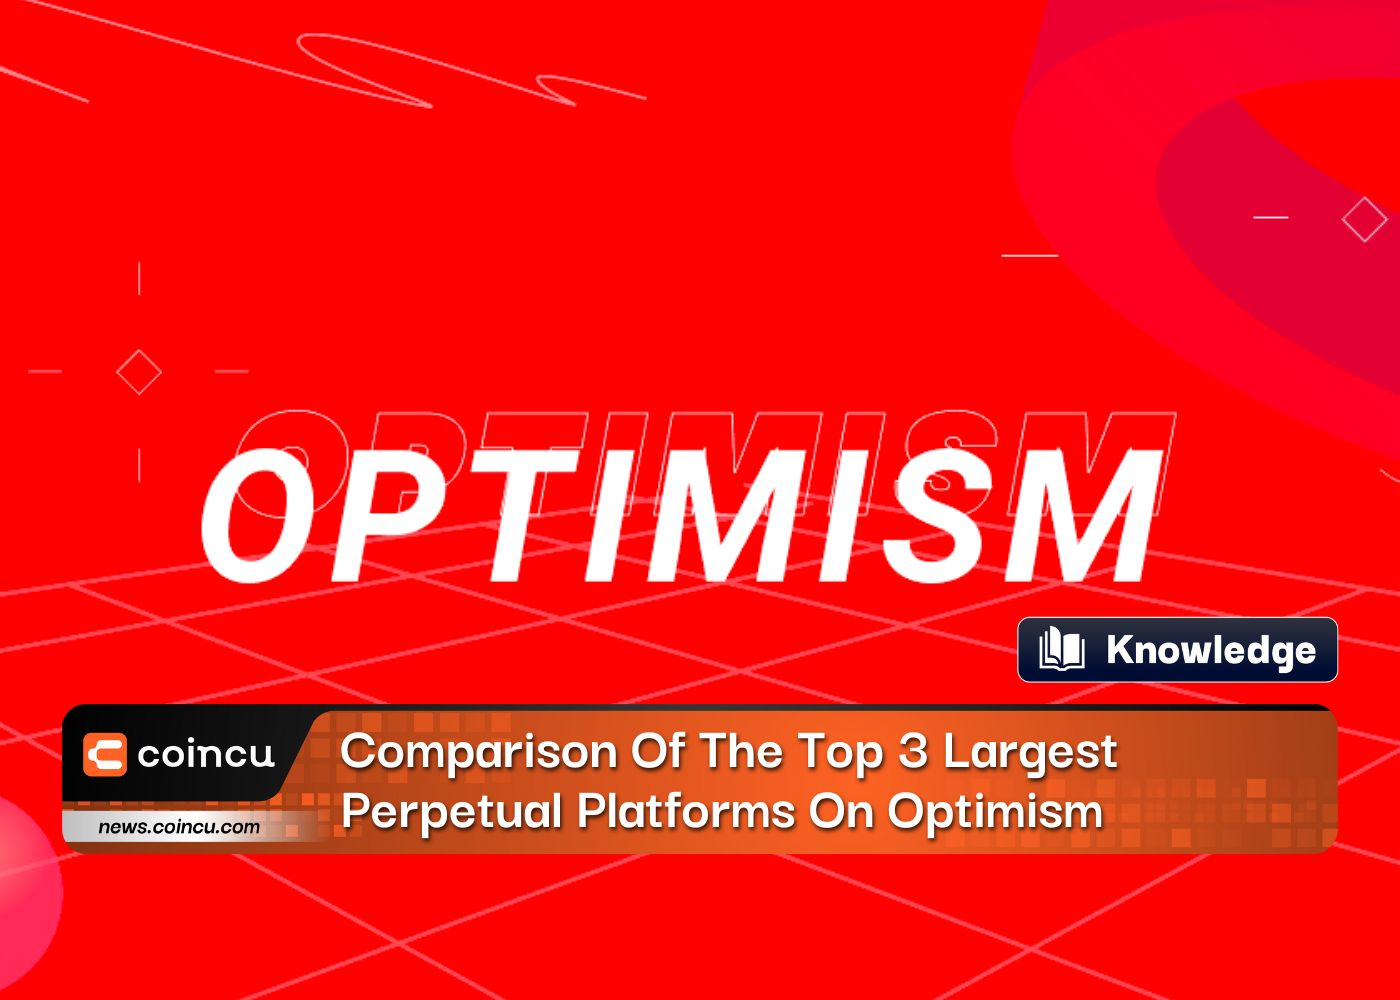 Comparison Of The Top 3 Largest Perpetual Platforms On Optimism